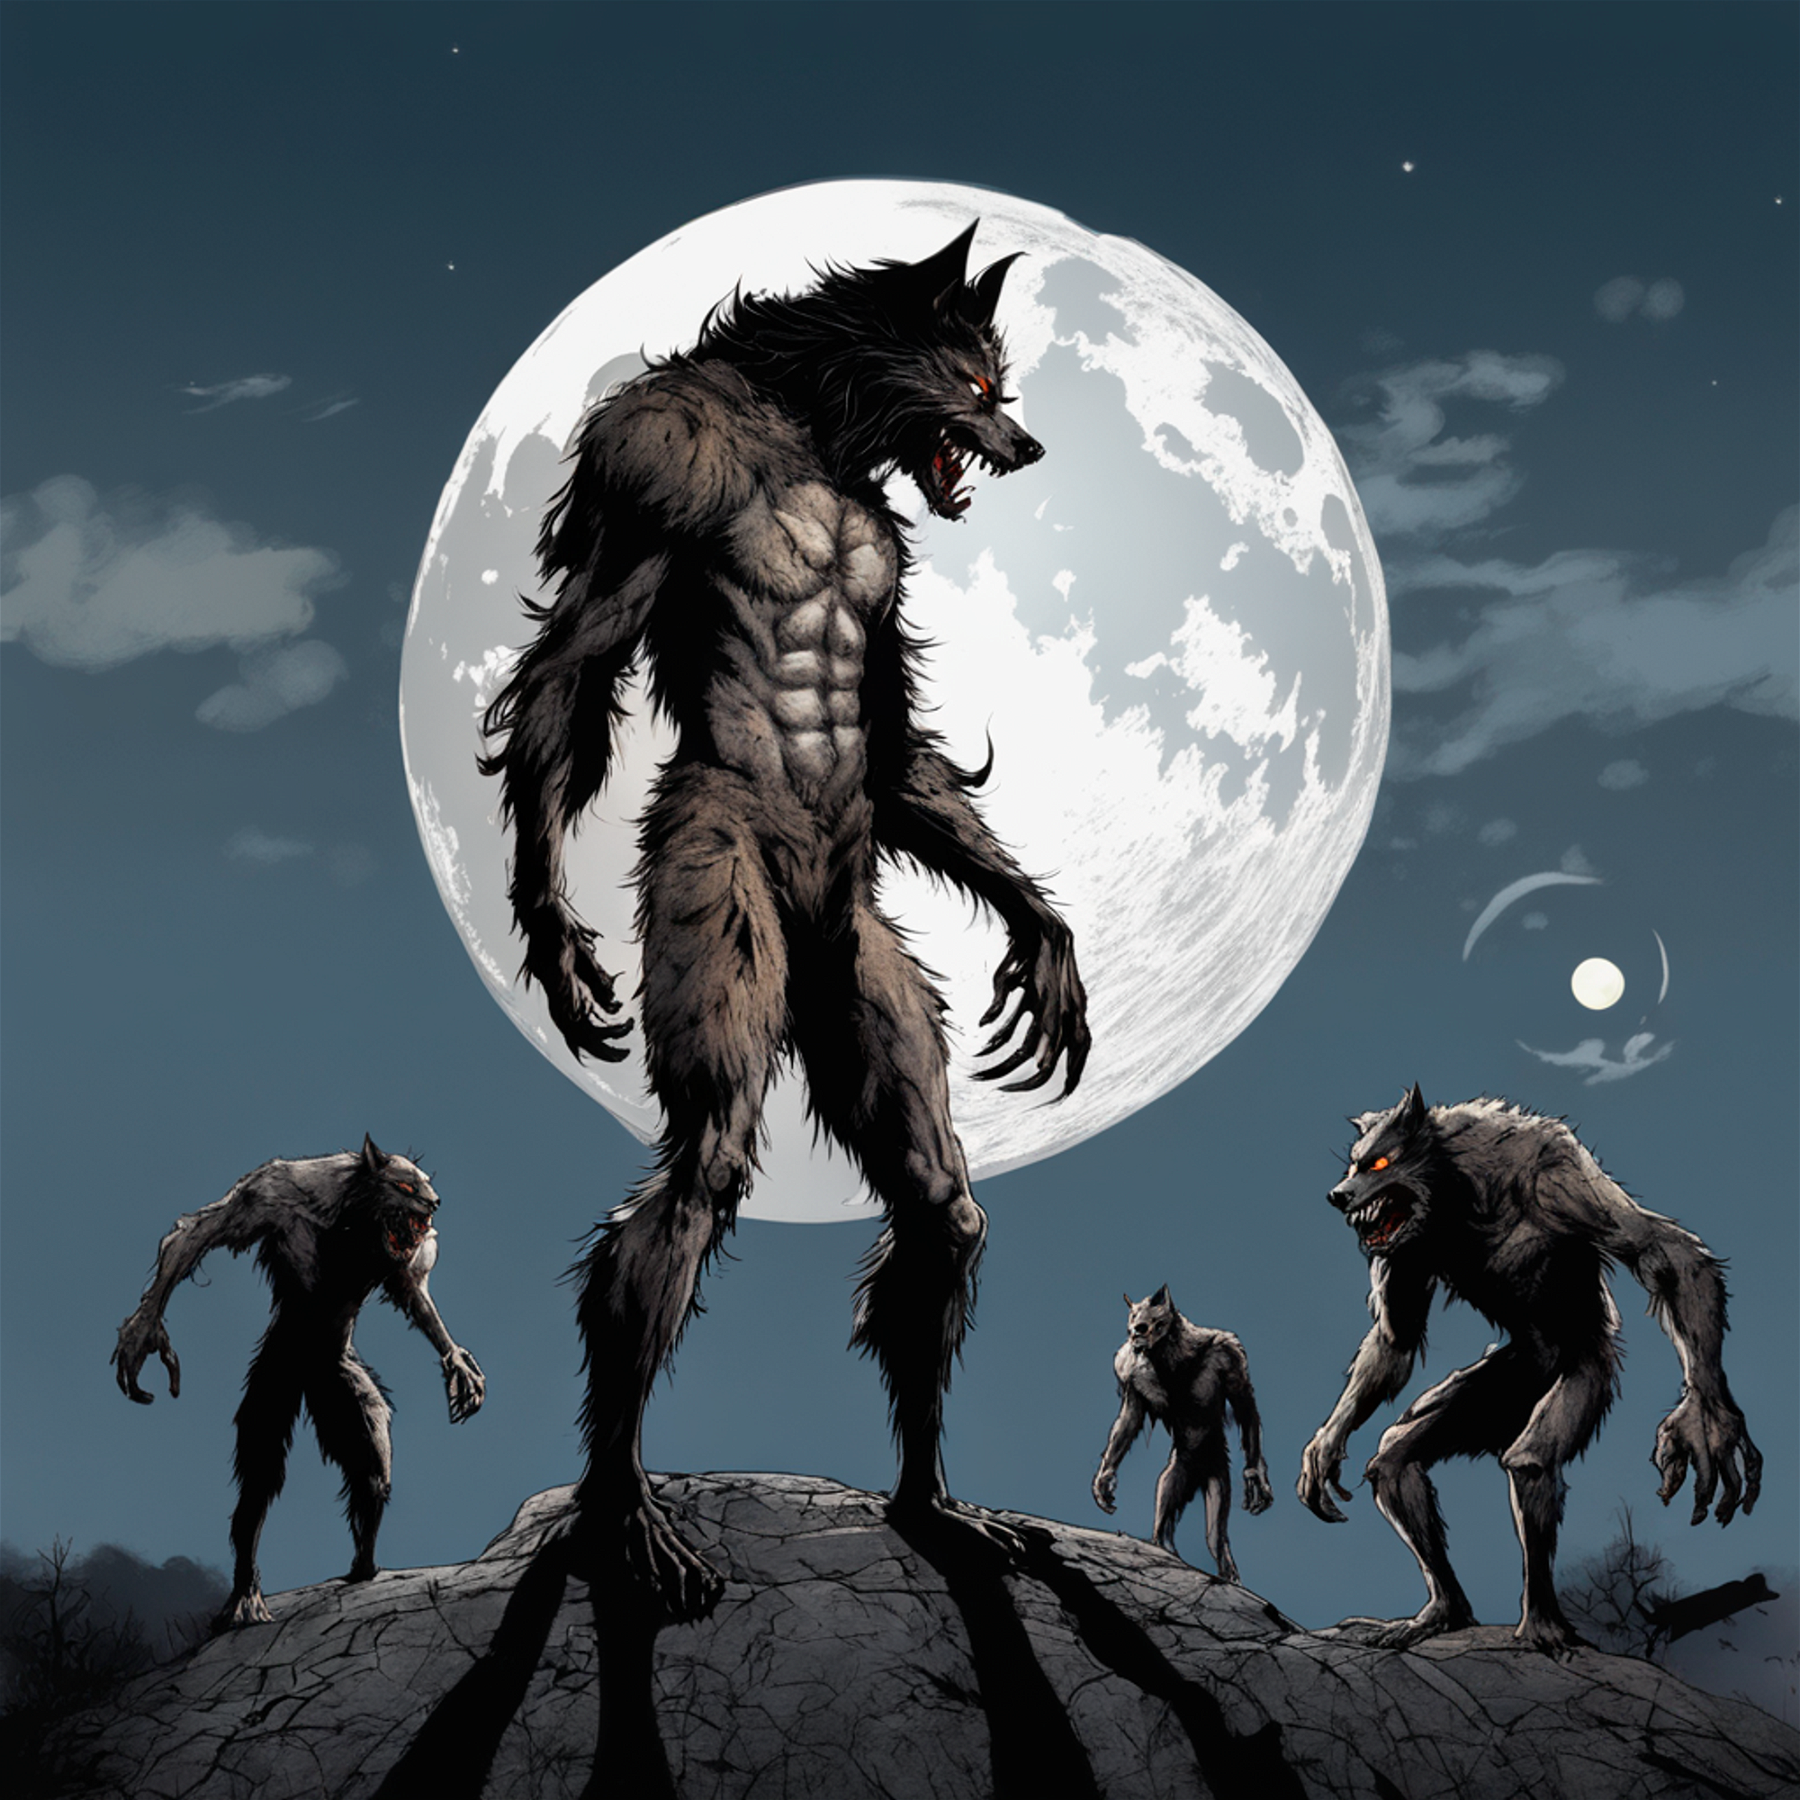 The werewolf, completing their transformation as the moon rises in the background. You can see the tattered remains of their clothes